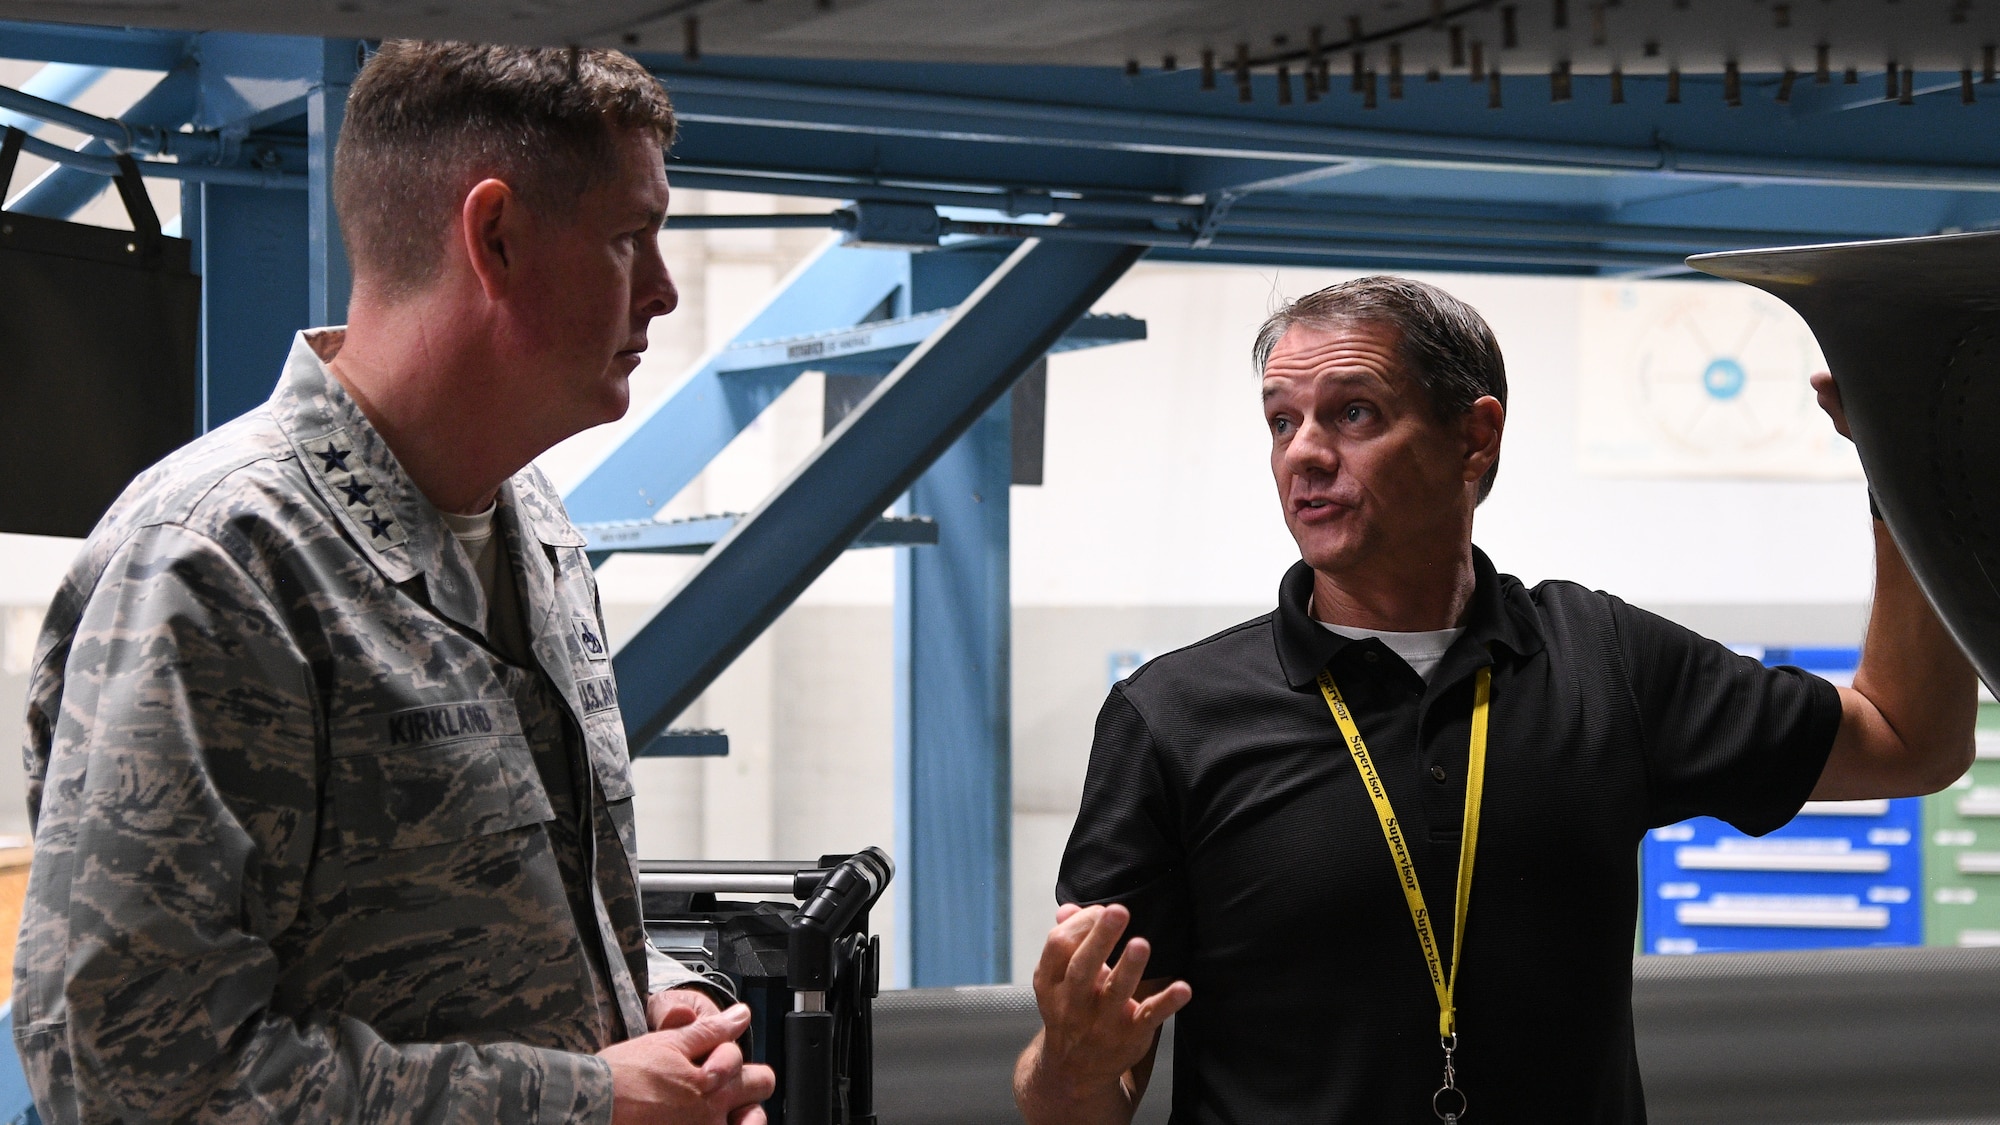 Joseph Gardenhour(right), 573rd Aircraft Maintenance Squadron director, speaks with Lt. Gen. Gene Kirkland, Air Force Sustainment Center commander, during thje general's site visit Oct. 2, 2018, at Hill Air Force Base, Utah. (U.S. Air Force photo by R. Nial Bradshaw)